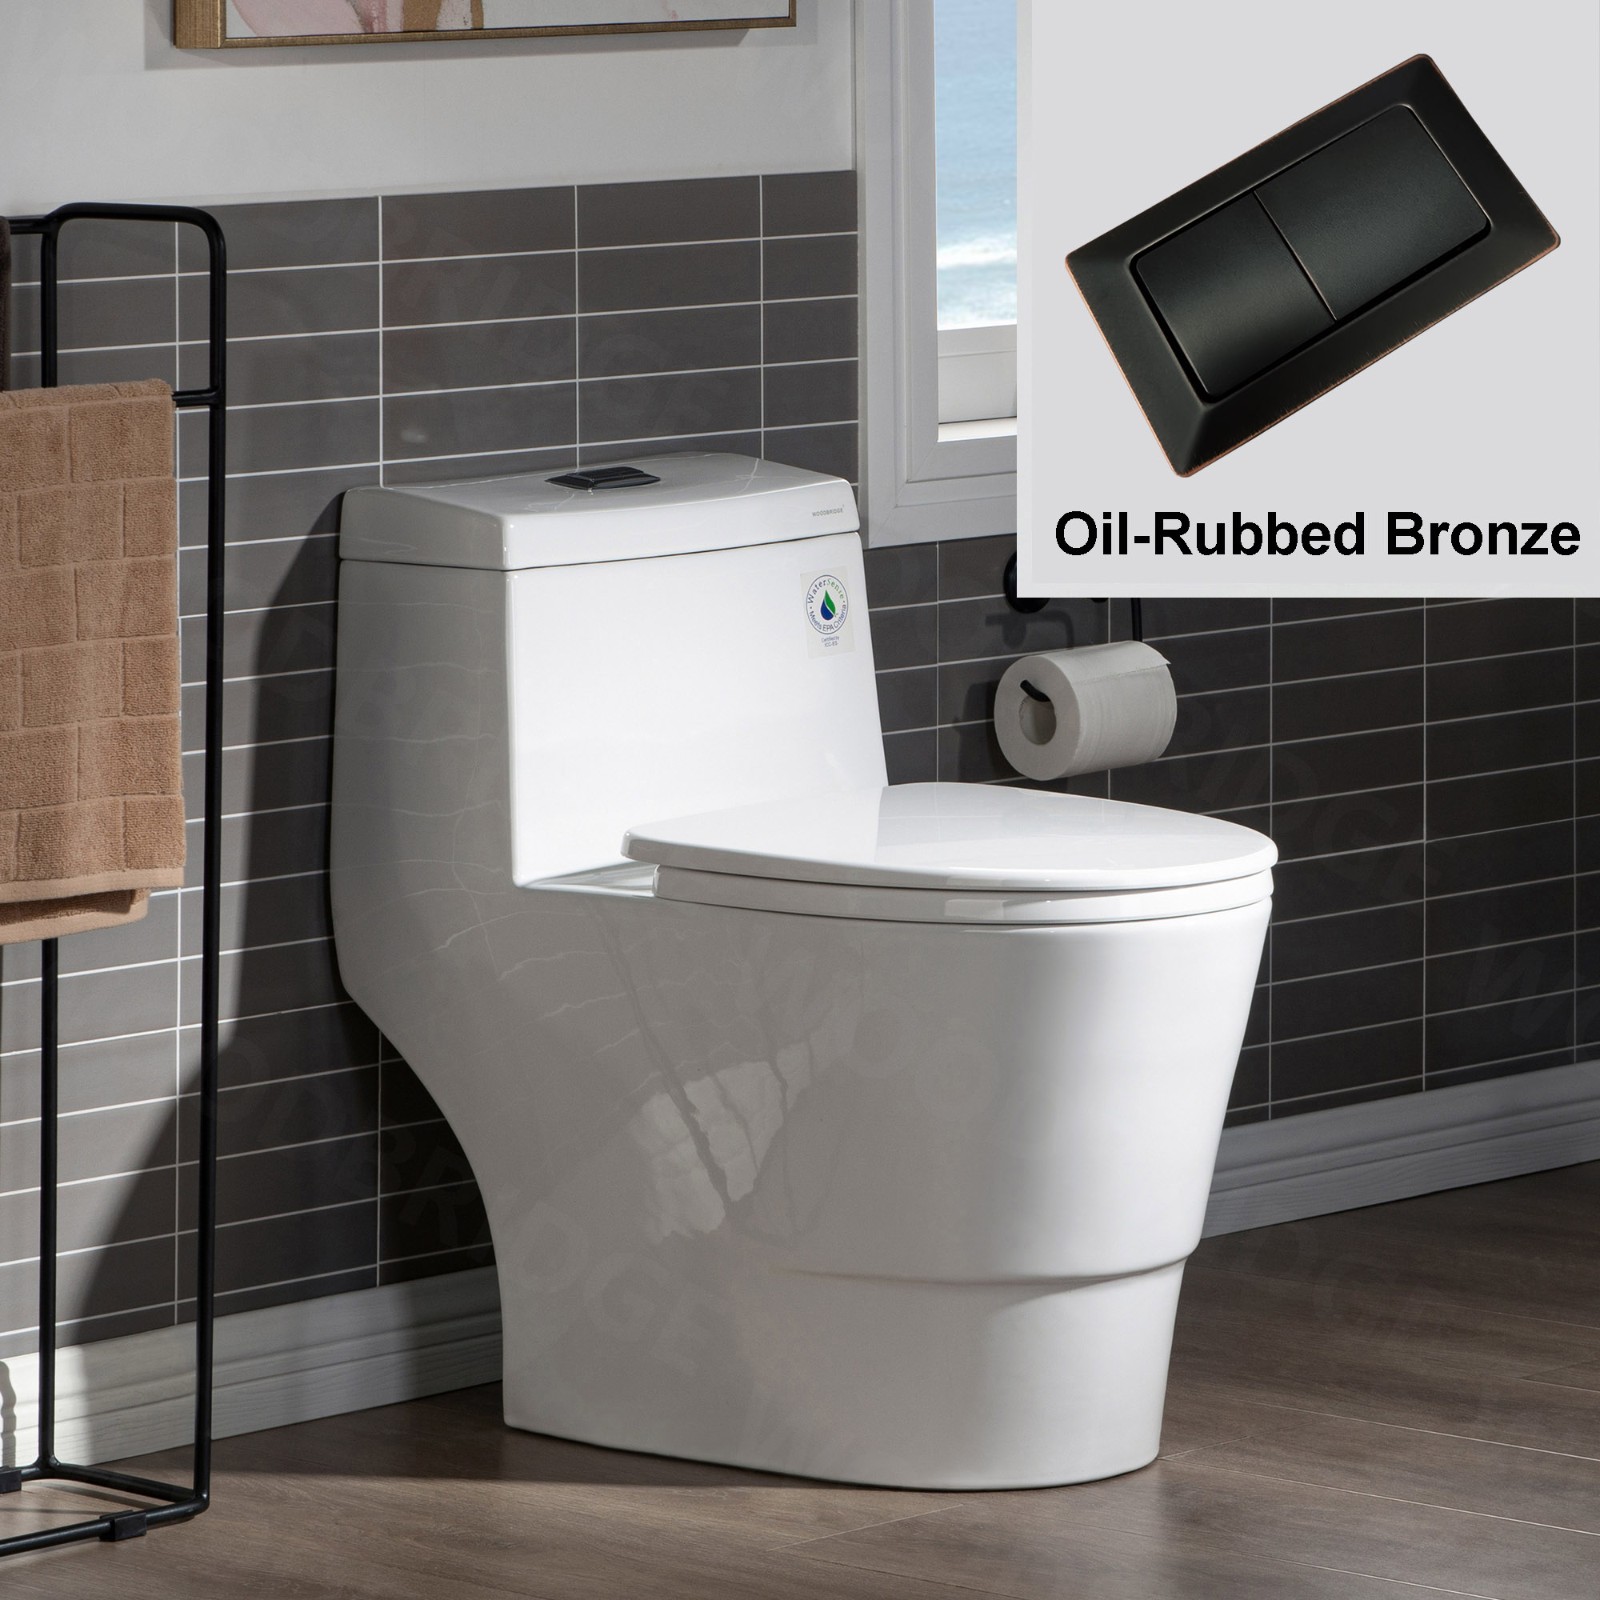  WOODBRIDGEE One Piece Toilet with Soft Closing Seat, Chair Height, 1.28 GPF Dual, Water Sensed, 1000 Gram MaP Flushing Score Toilet with Oil Rubbed Bronze Button T0001-ORB, White_5693